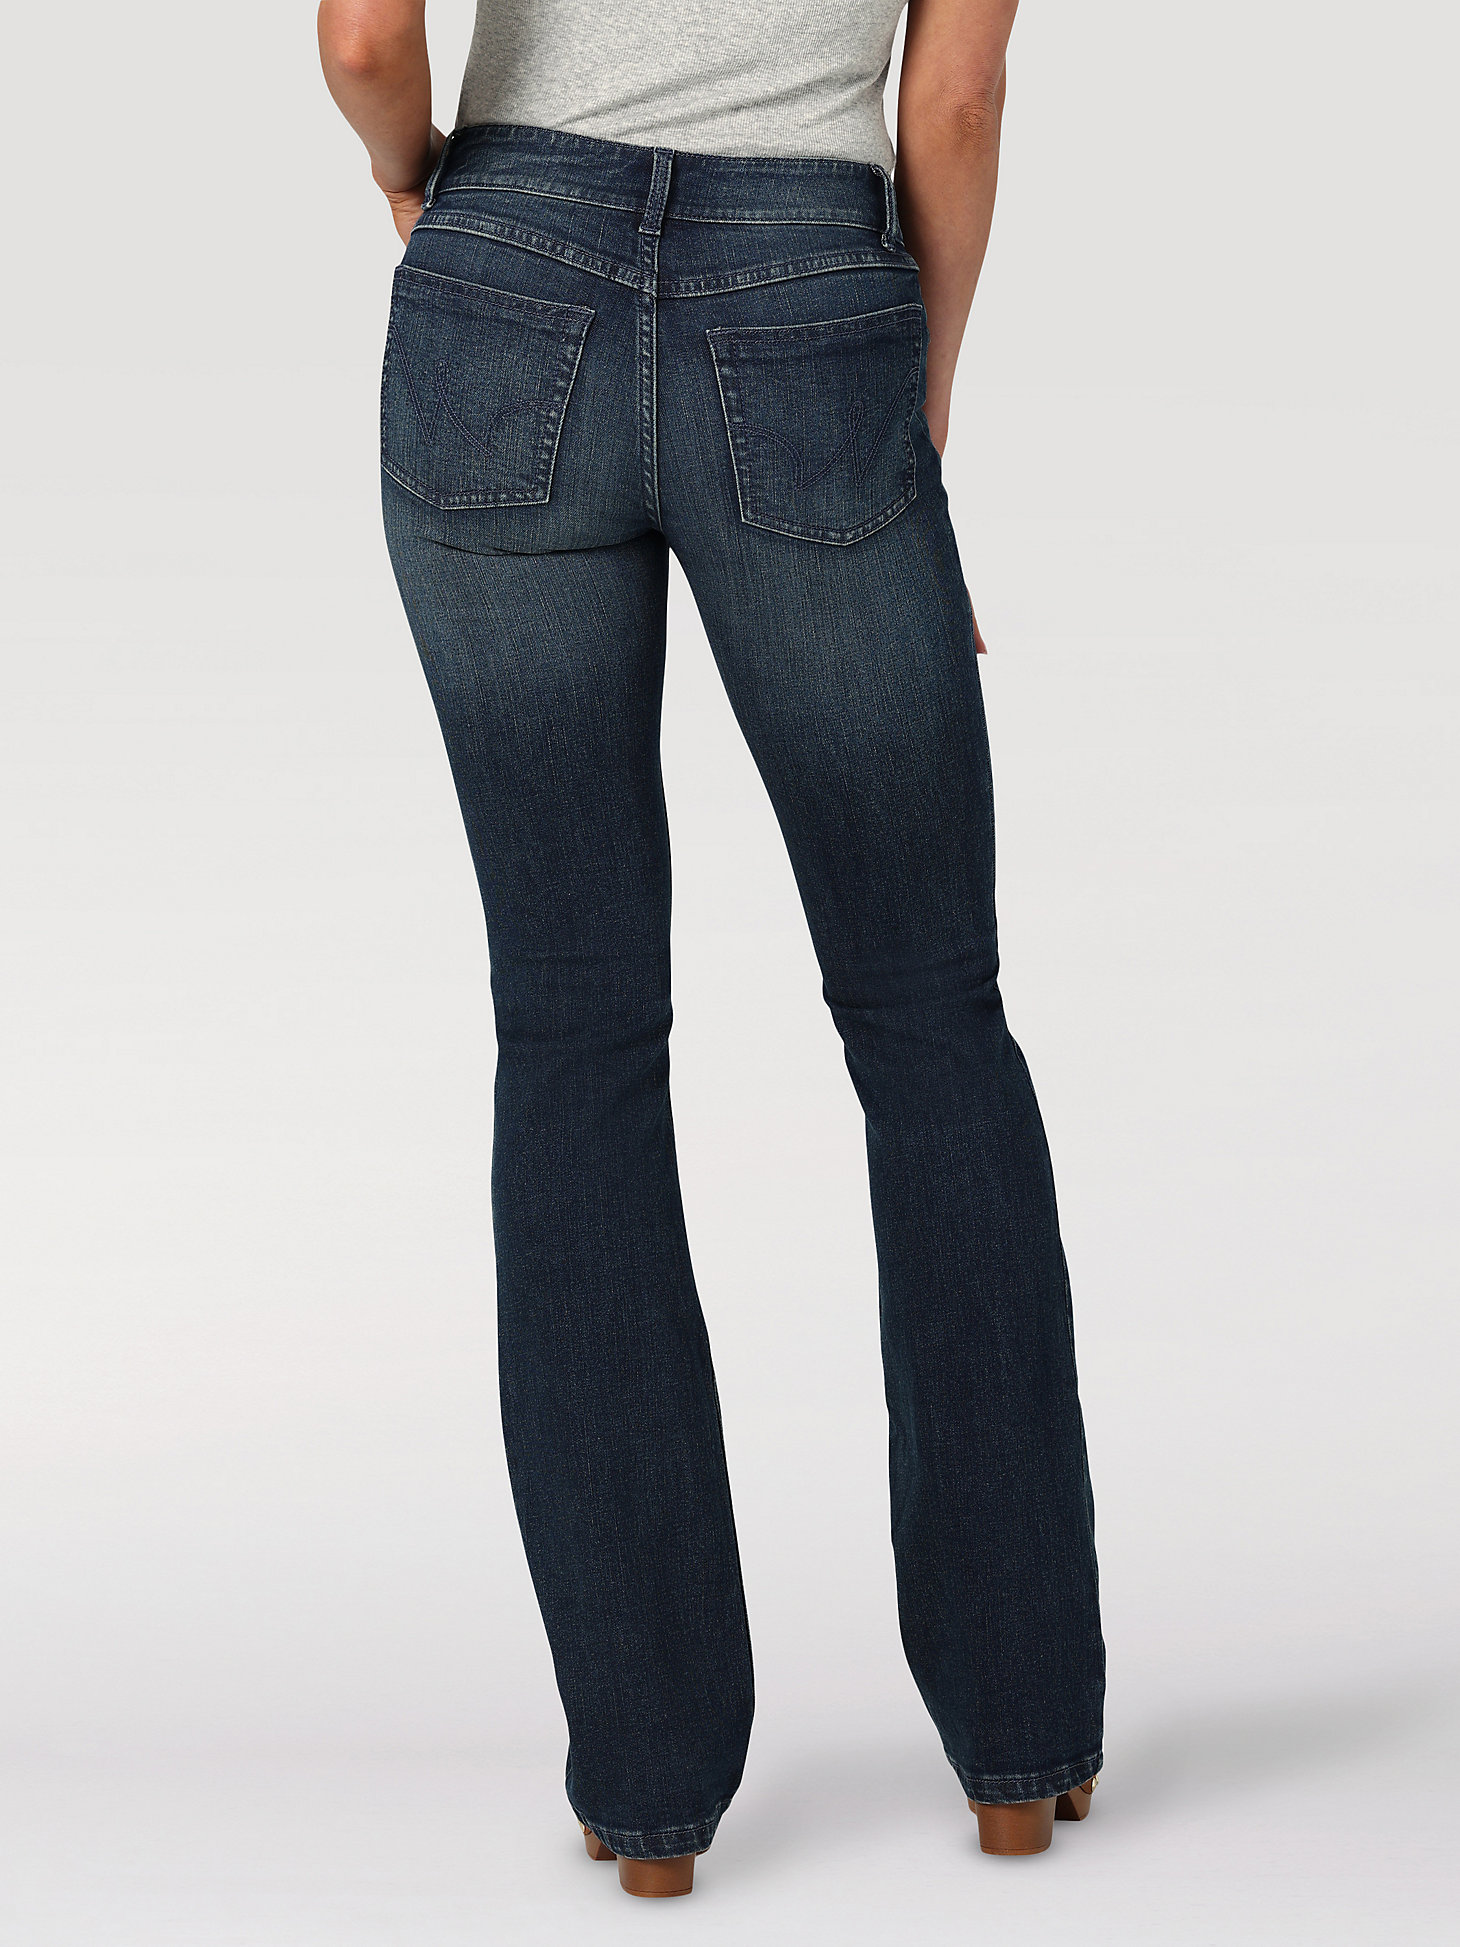 Women's Essential Mid-Rise Bootcut Jean in Taylor alternative view 2